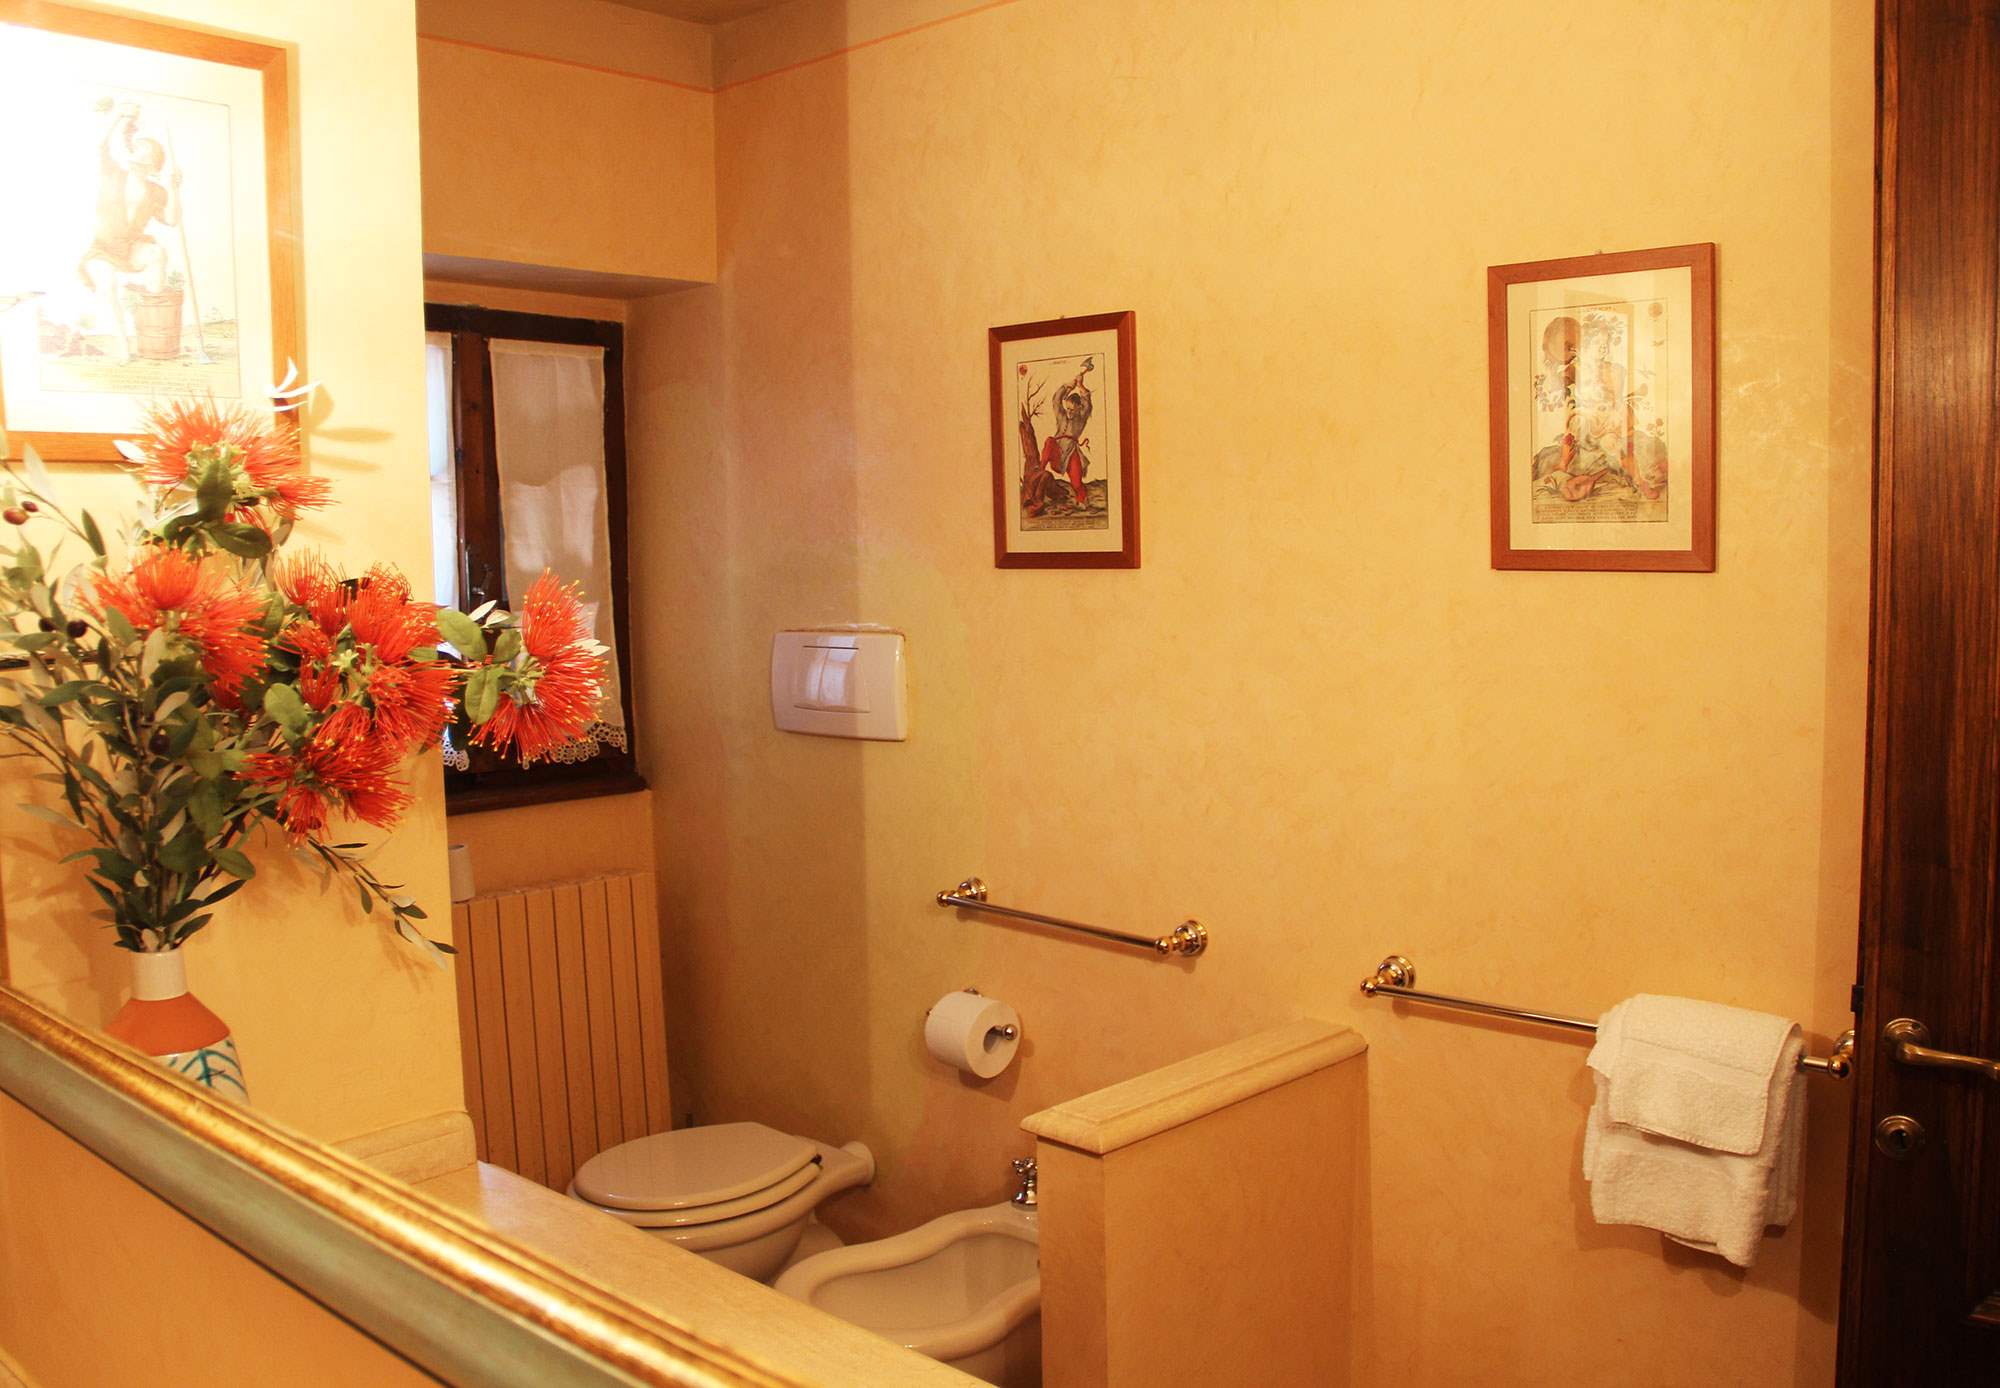 Villa Felicita, Main house only, up to 6 persons , 3 bedroom villa in Chianti & Countryside, Tuscany Photo #22